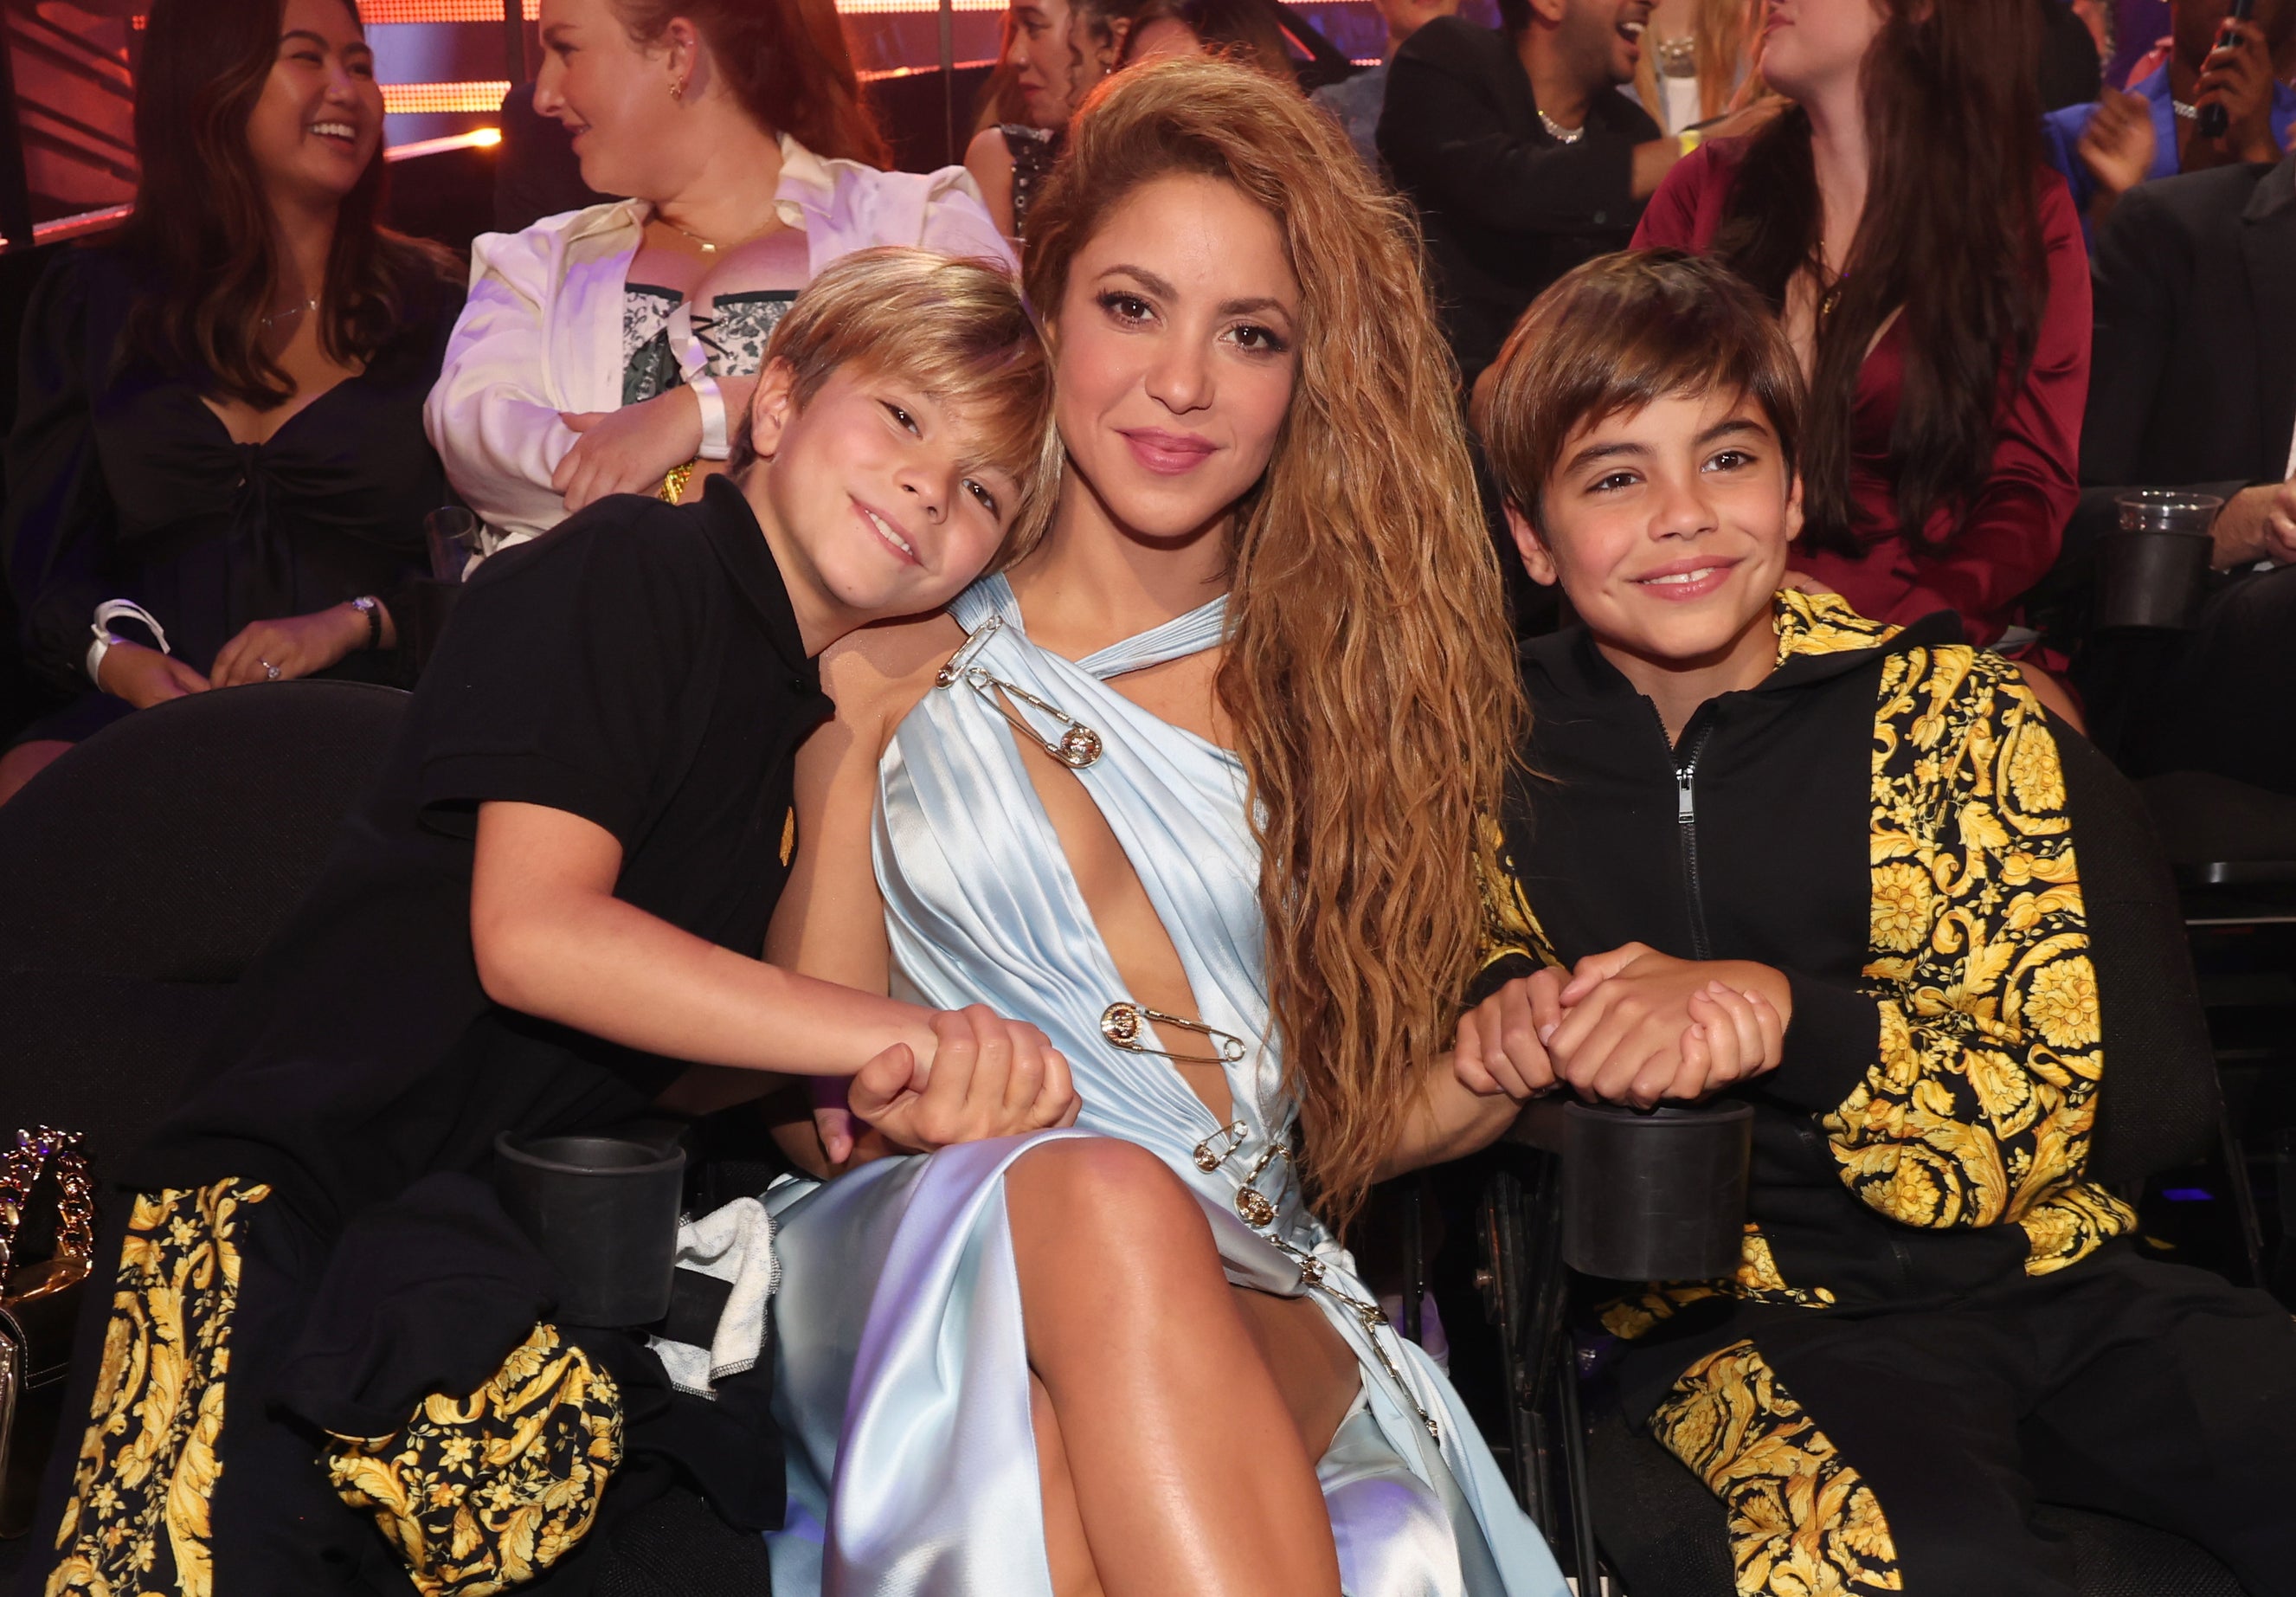 Shakira in a satin dress with a thigh-high slit, seated with her two sons at an awards show